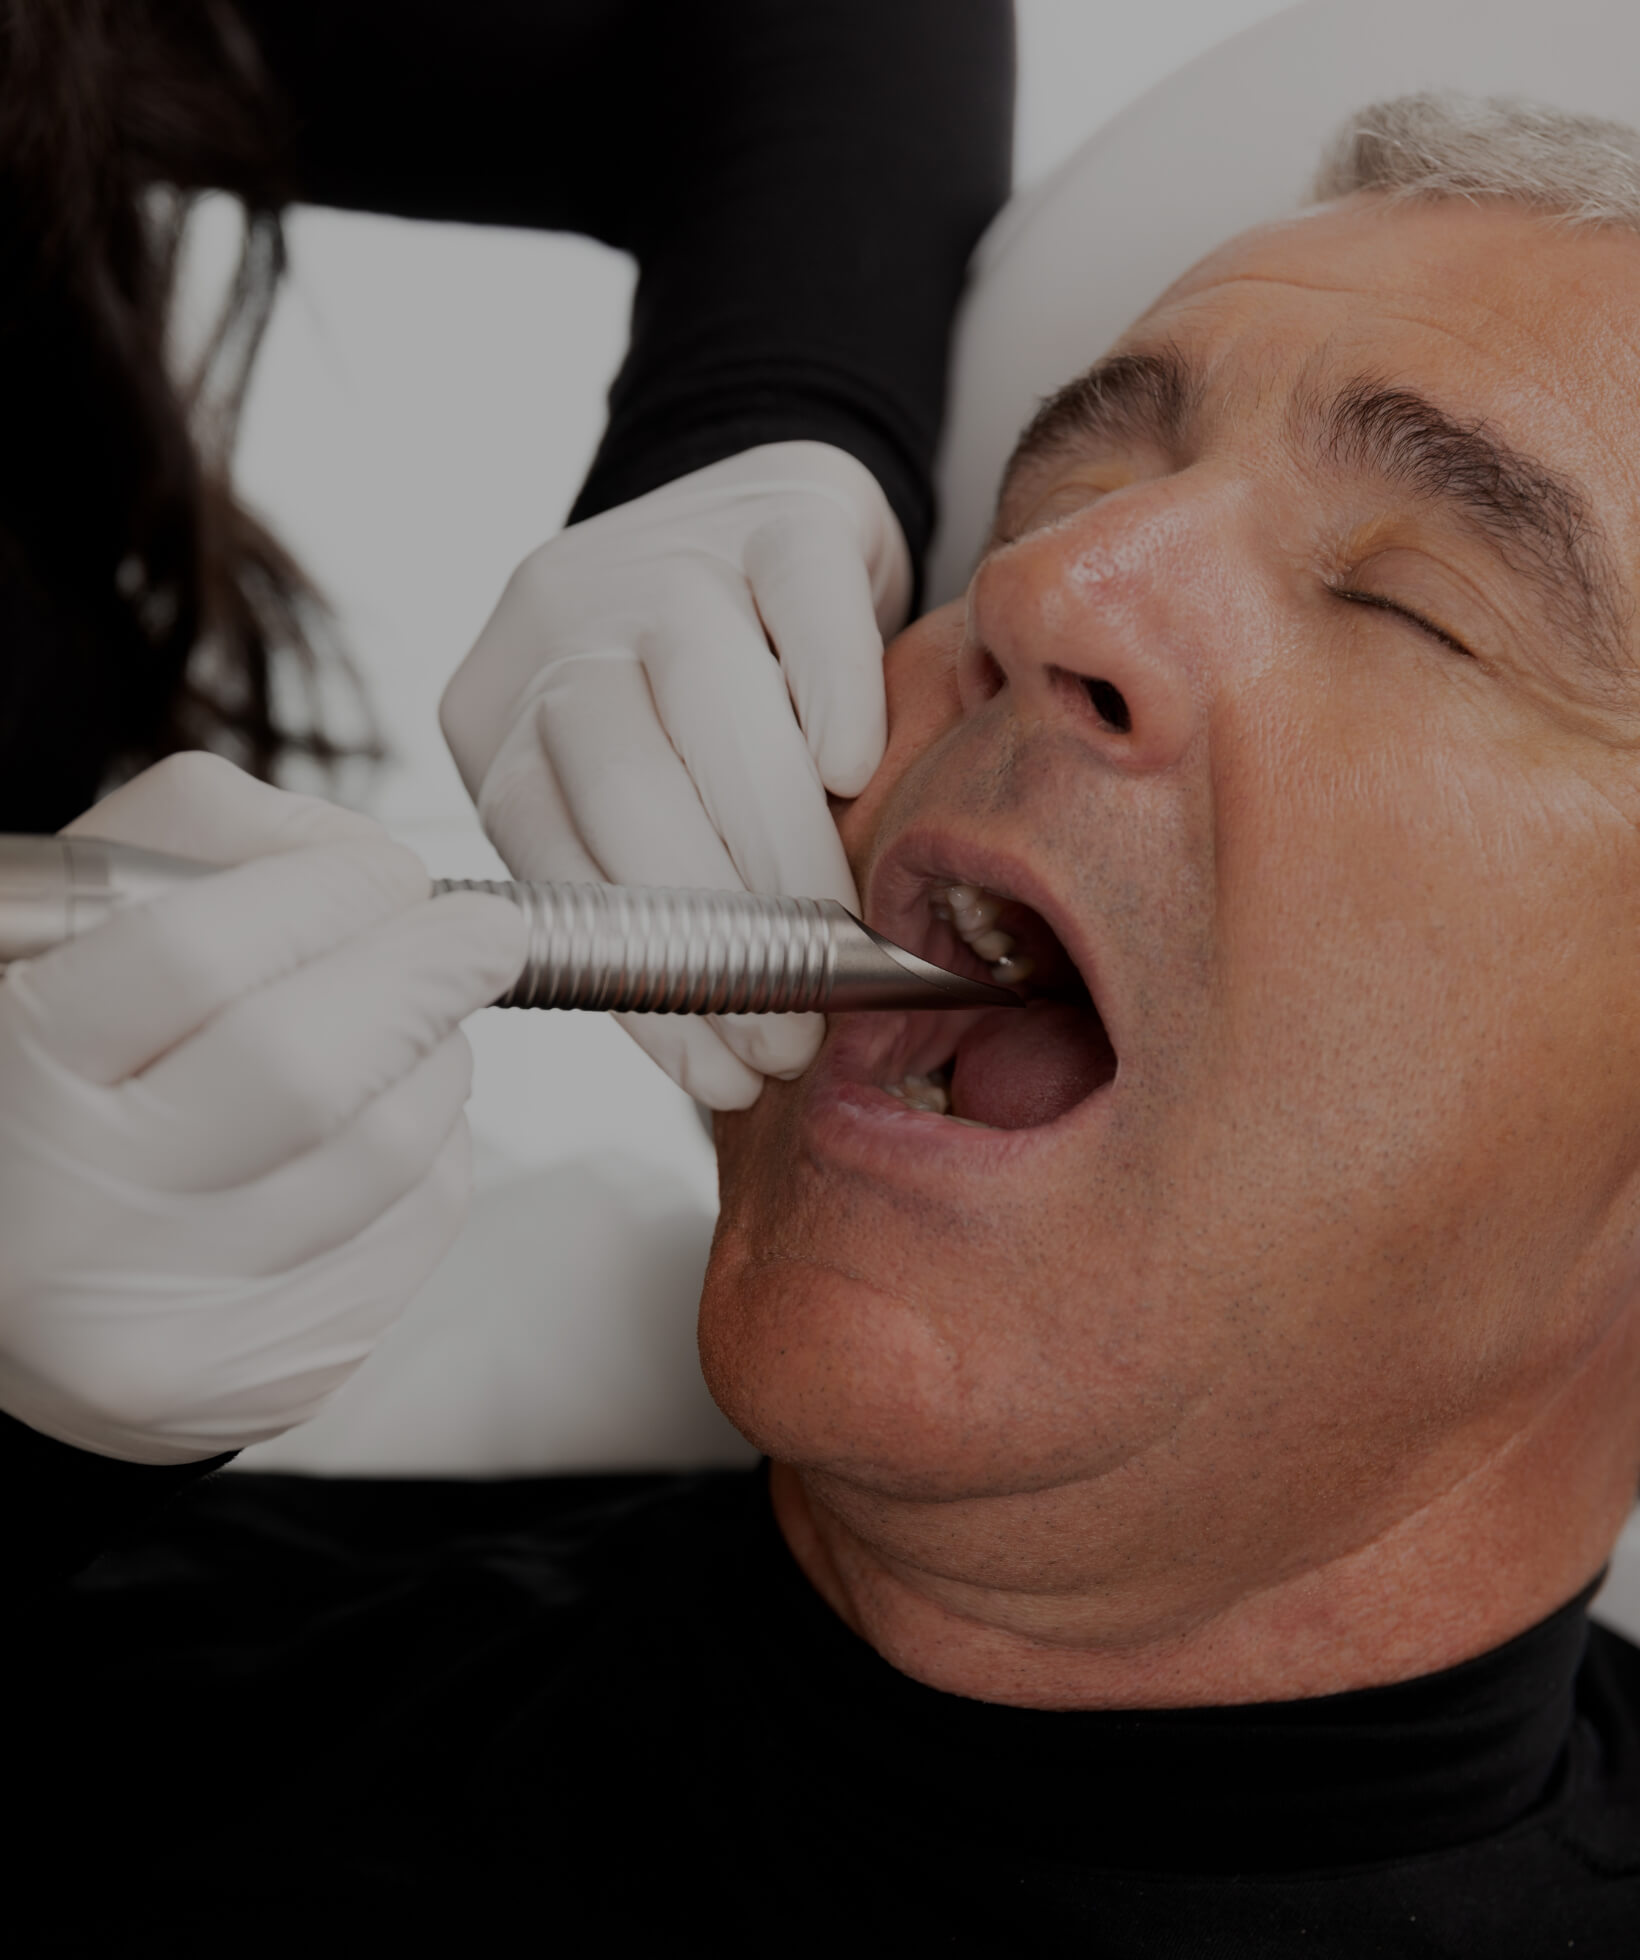 A Clinique Chloé medical aesthetic technician performing a NightLase intraoral laser treatment in a patient's mouth